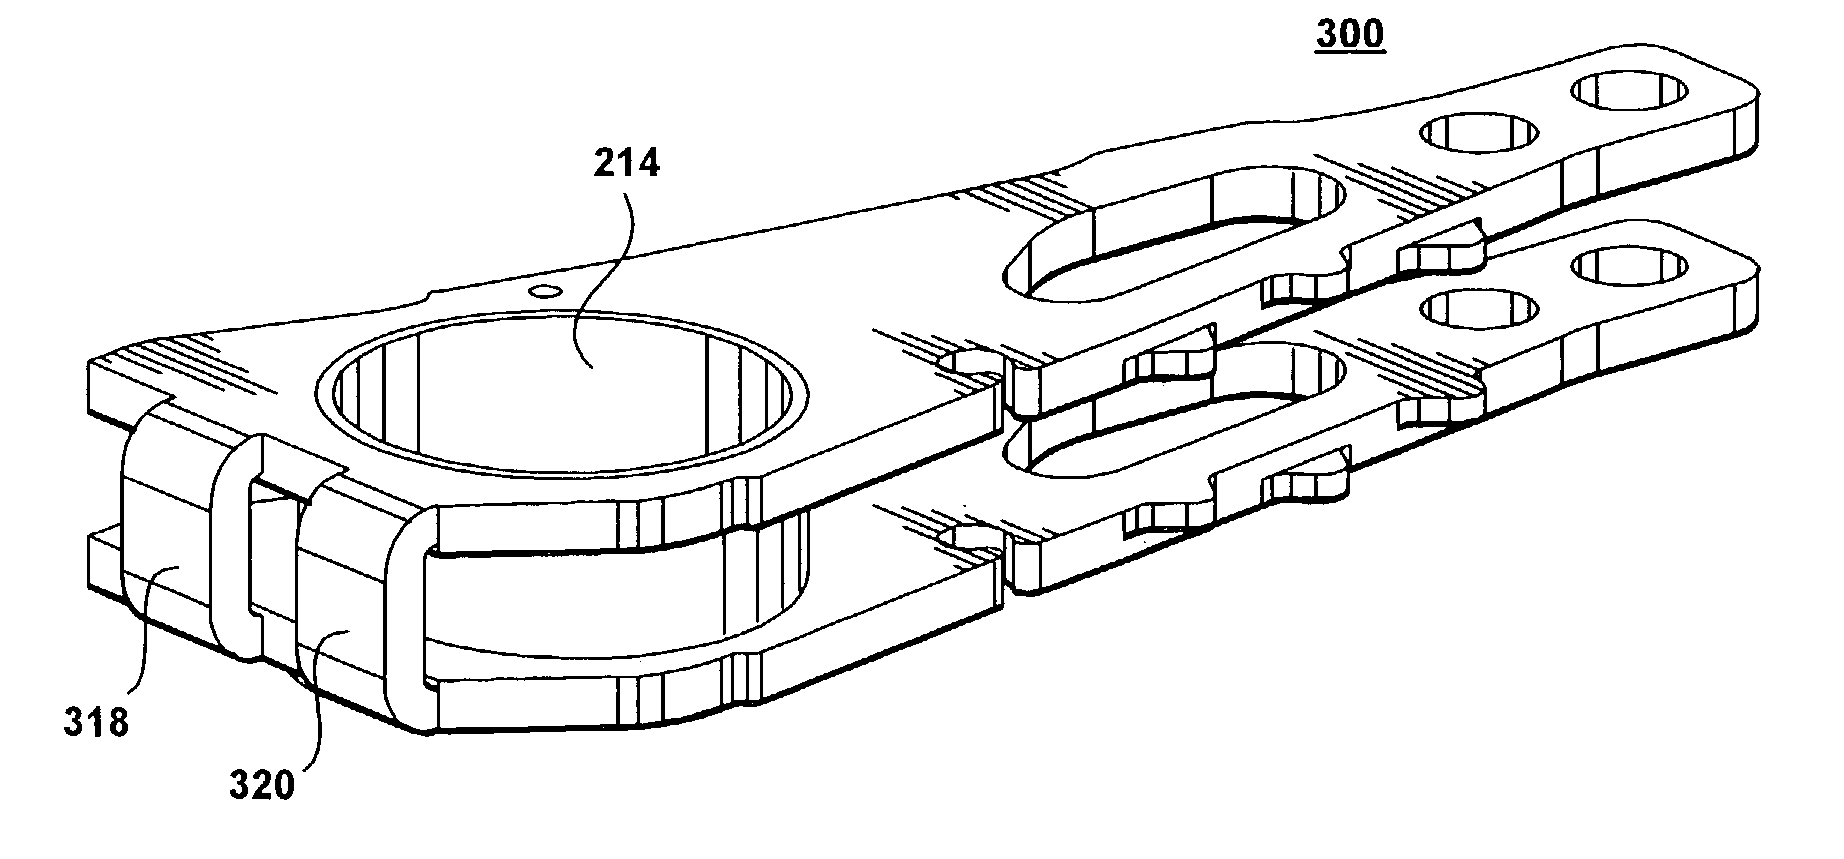 Disk drive including a stamped arm assembly and method of making an actuator arm assembly